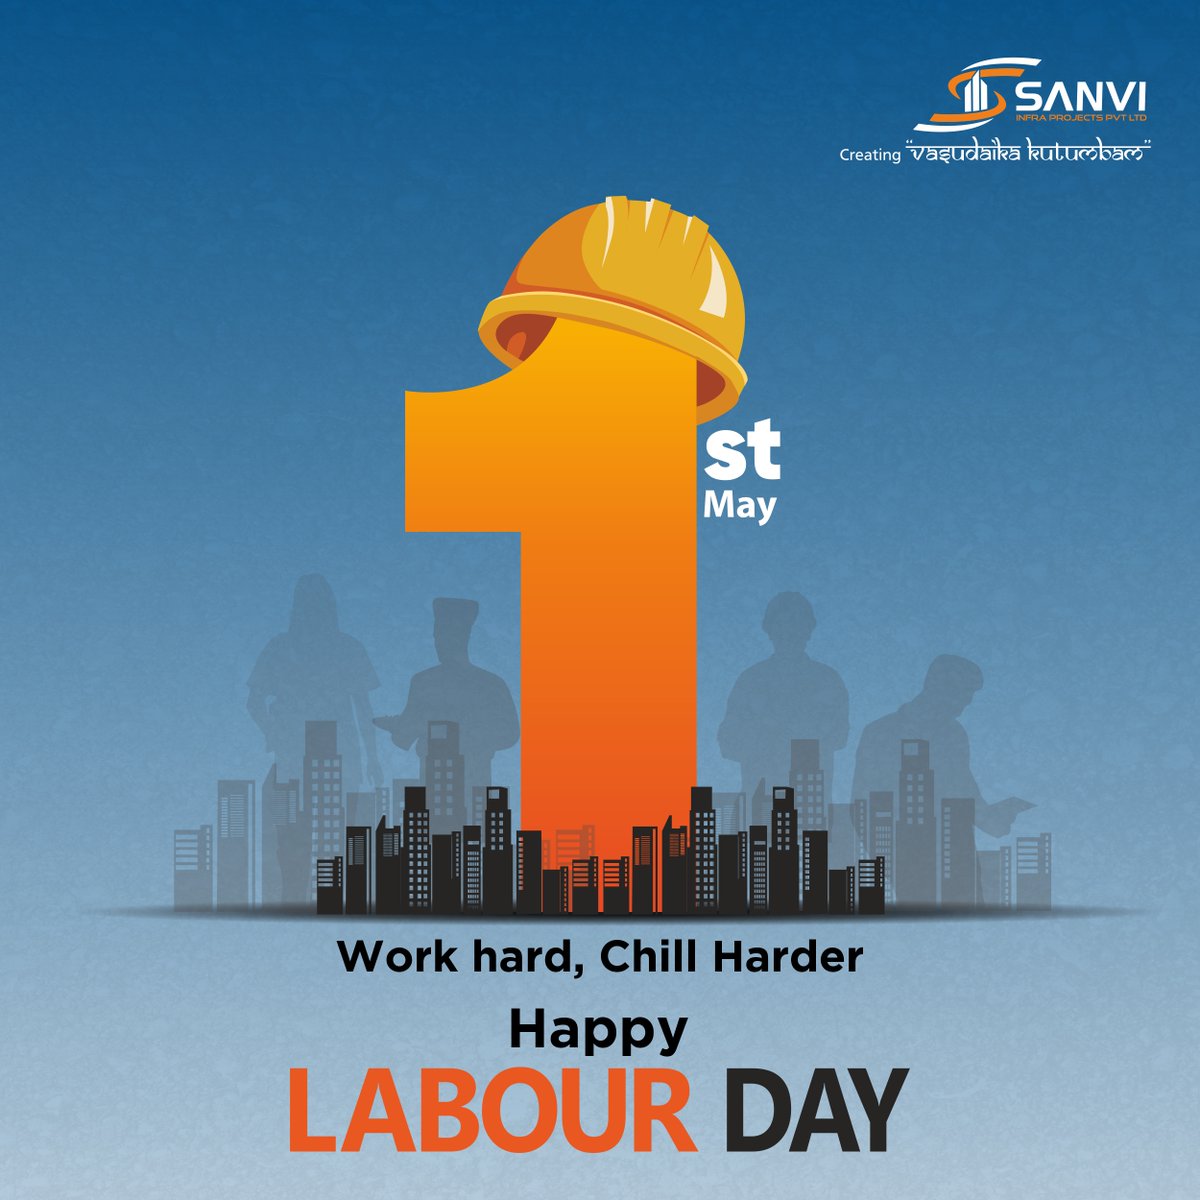 let's salute the unsung heroes whose dedication powers our nation's prosperity. From the factories to the offices, your hard work fuels our collective success.

#sanviinfra #kowsalyamanidweepam #LaborDay2024 #LabourDay2024 #mayday #InternationalWorkersDay #MayDay2024